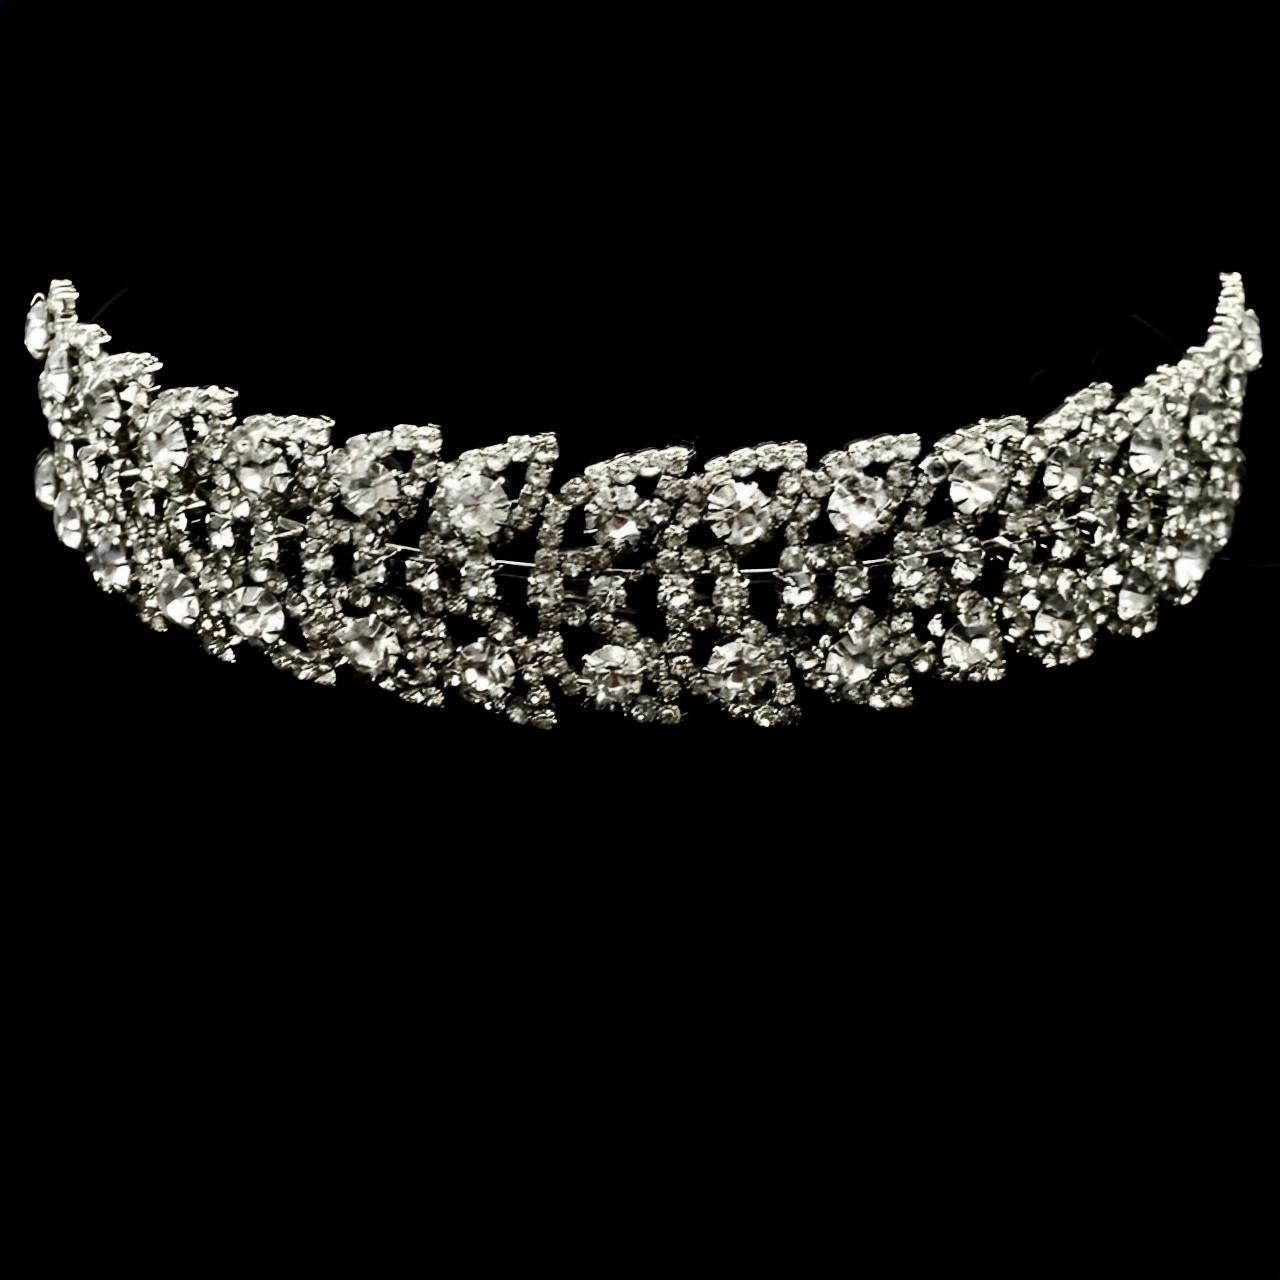 Silver Plated Tiara / Headband with Faceted Rhinestones circa 1980s For Sale 1